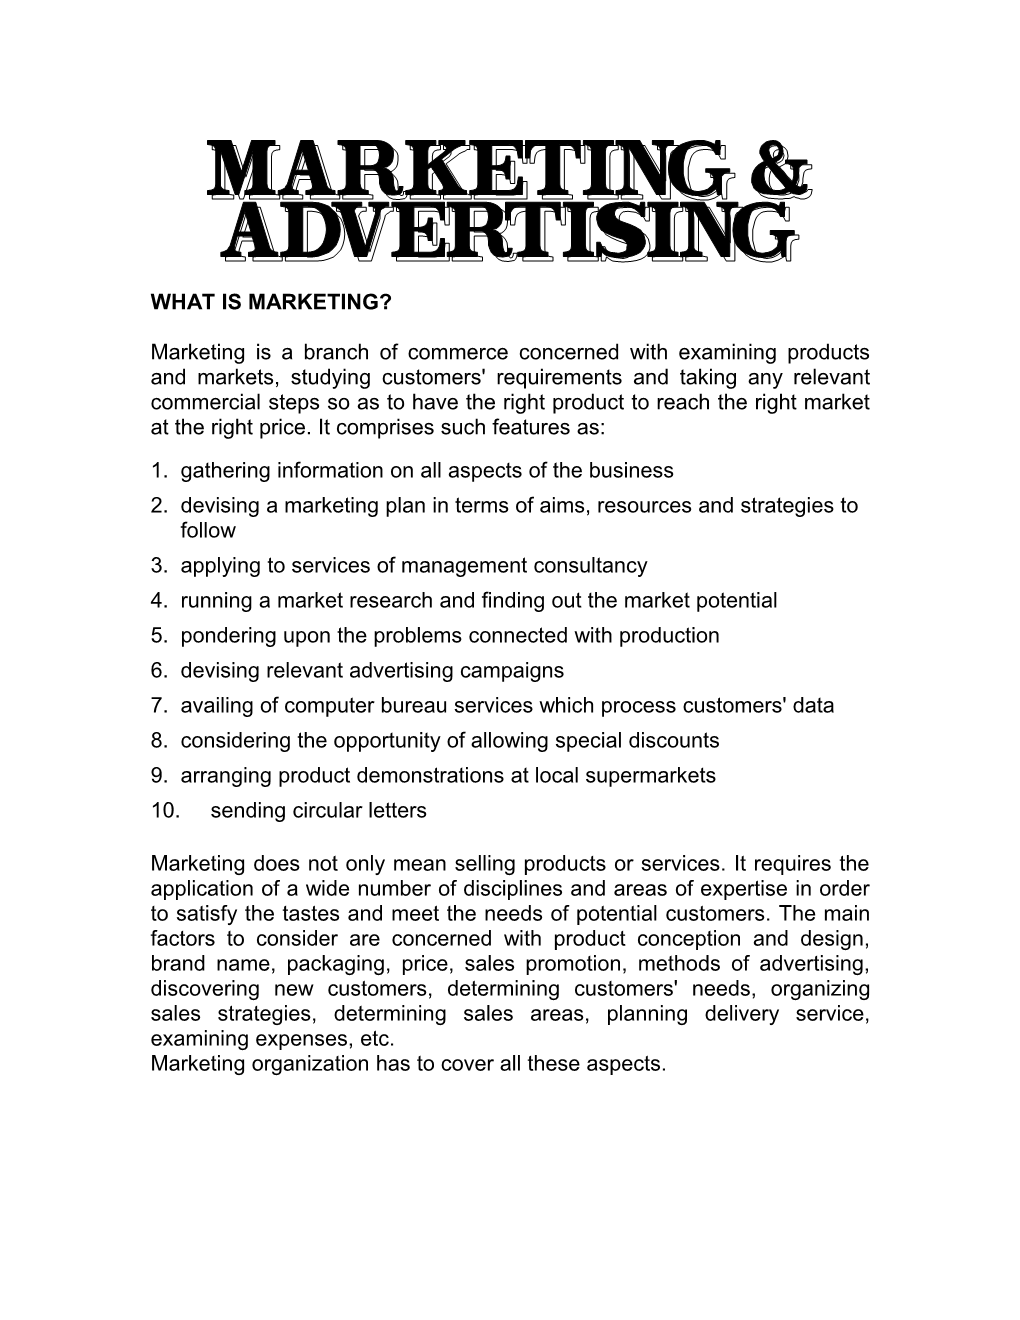 Marketing and Advertising